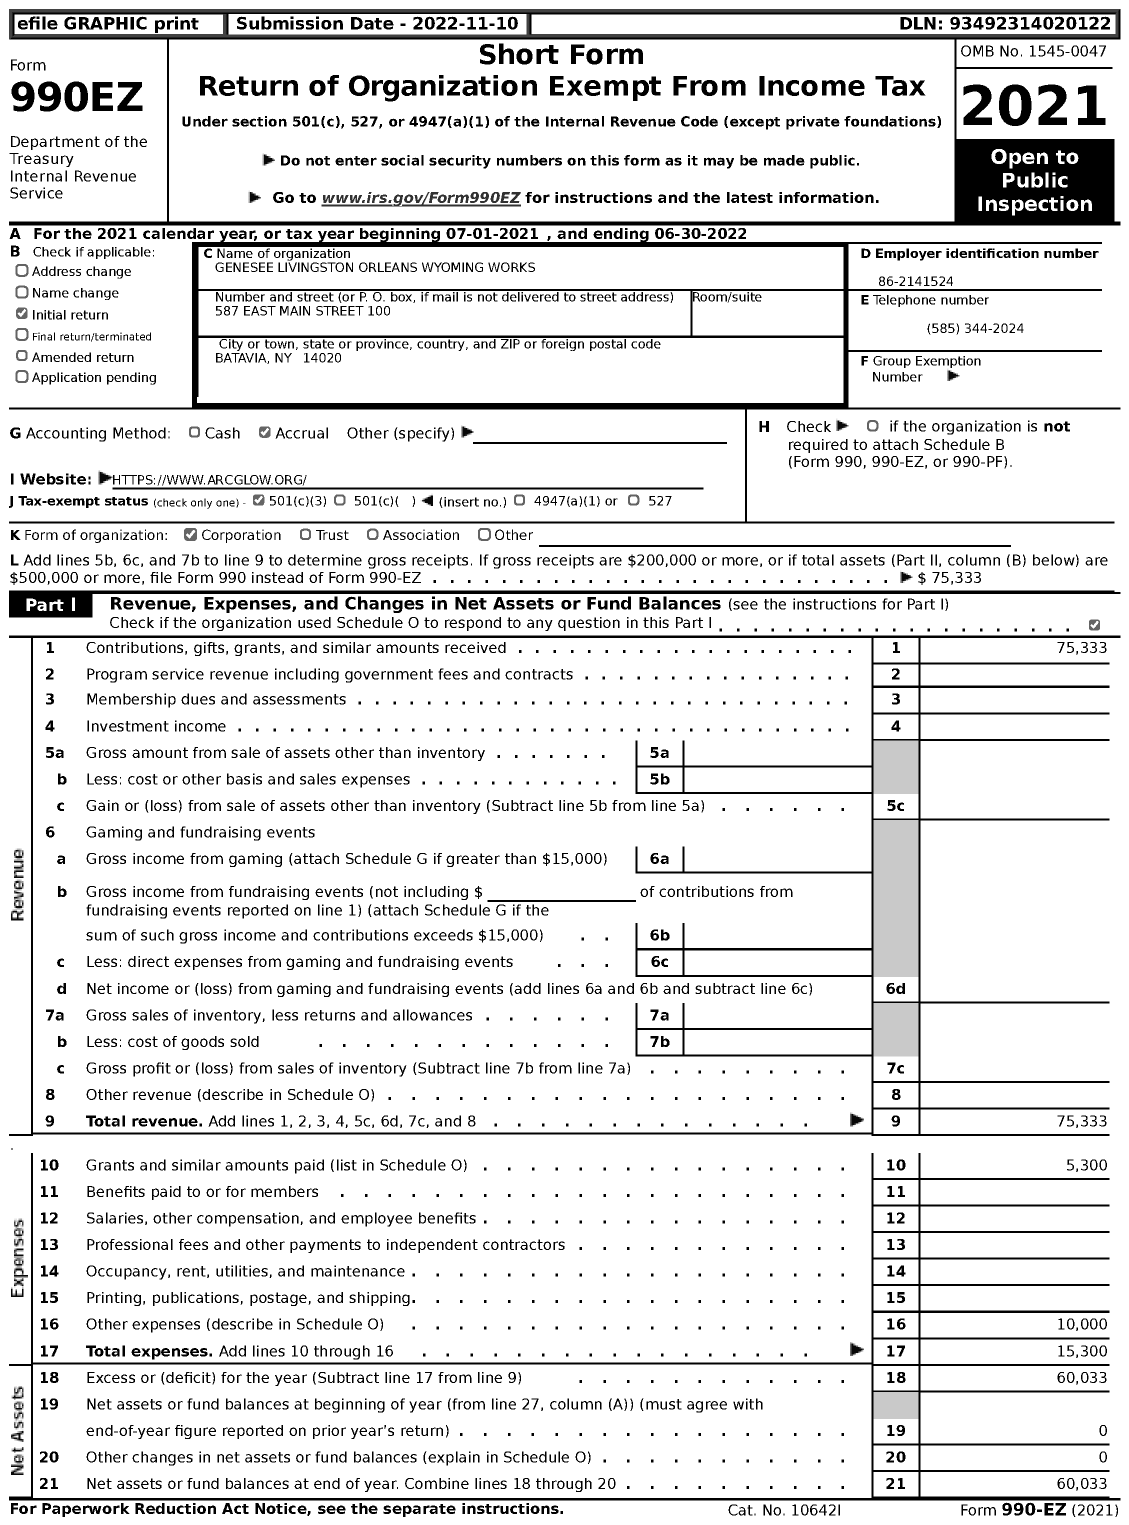 Image of first page of 2021 Form 990EZ for Genesee Livingston Orleans Wyoming Works